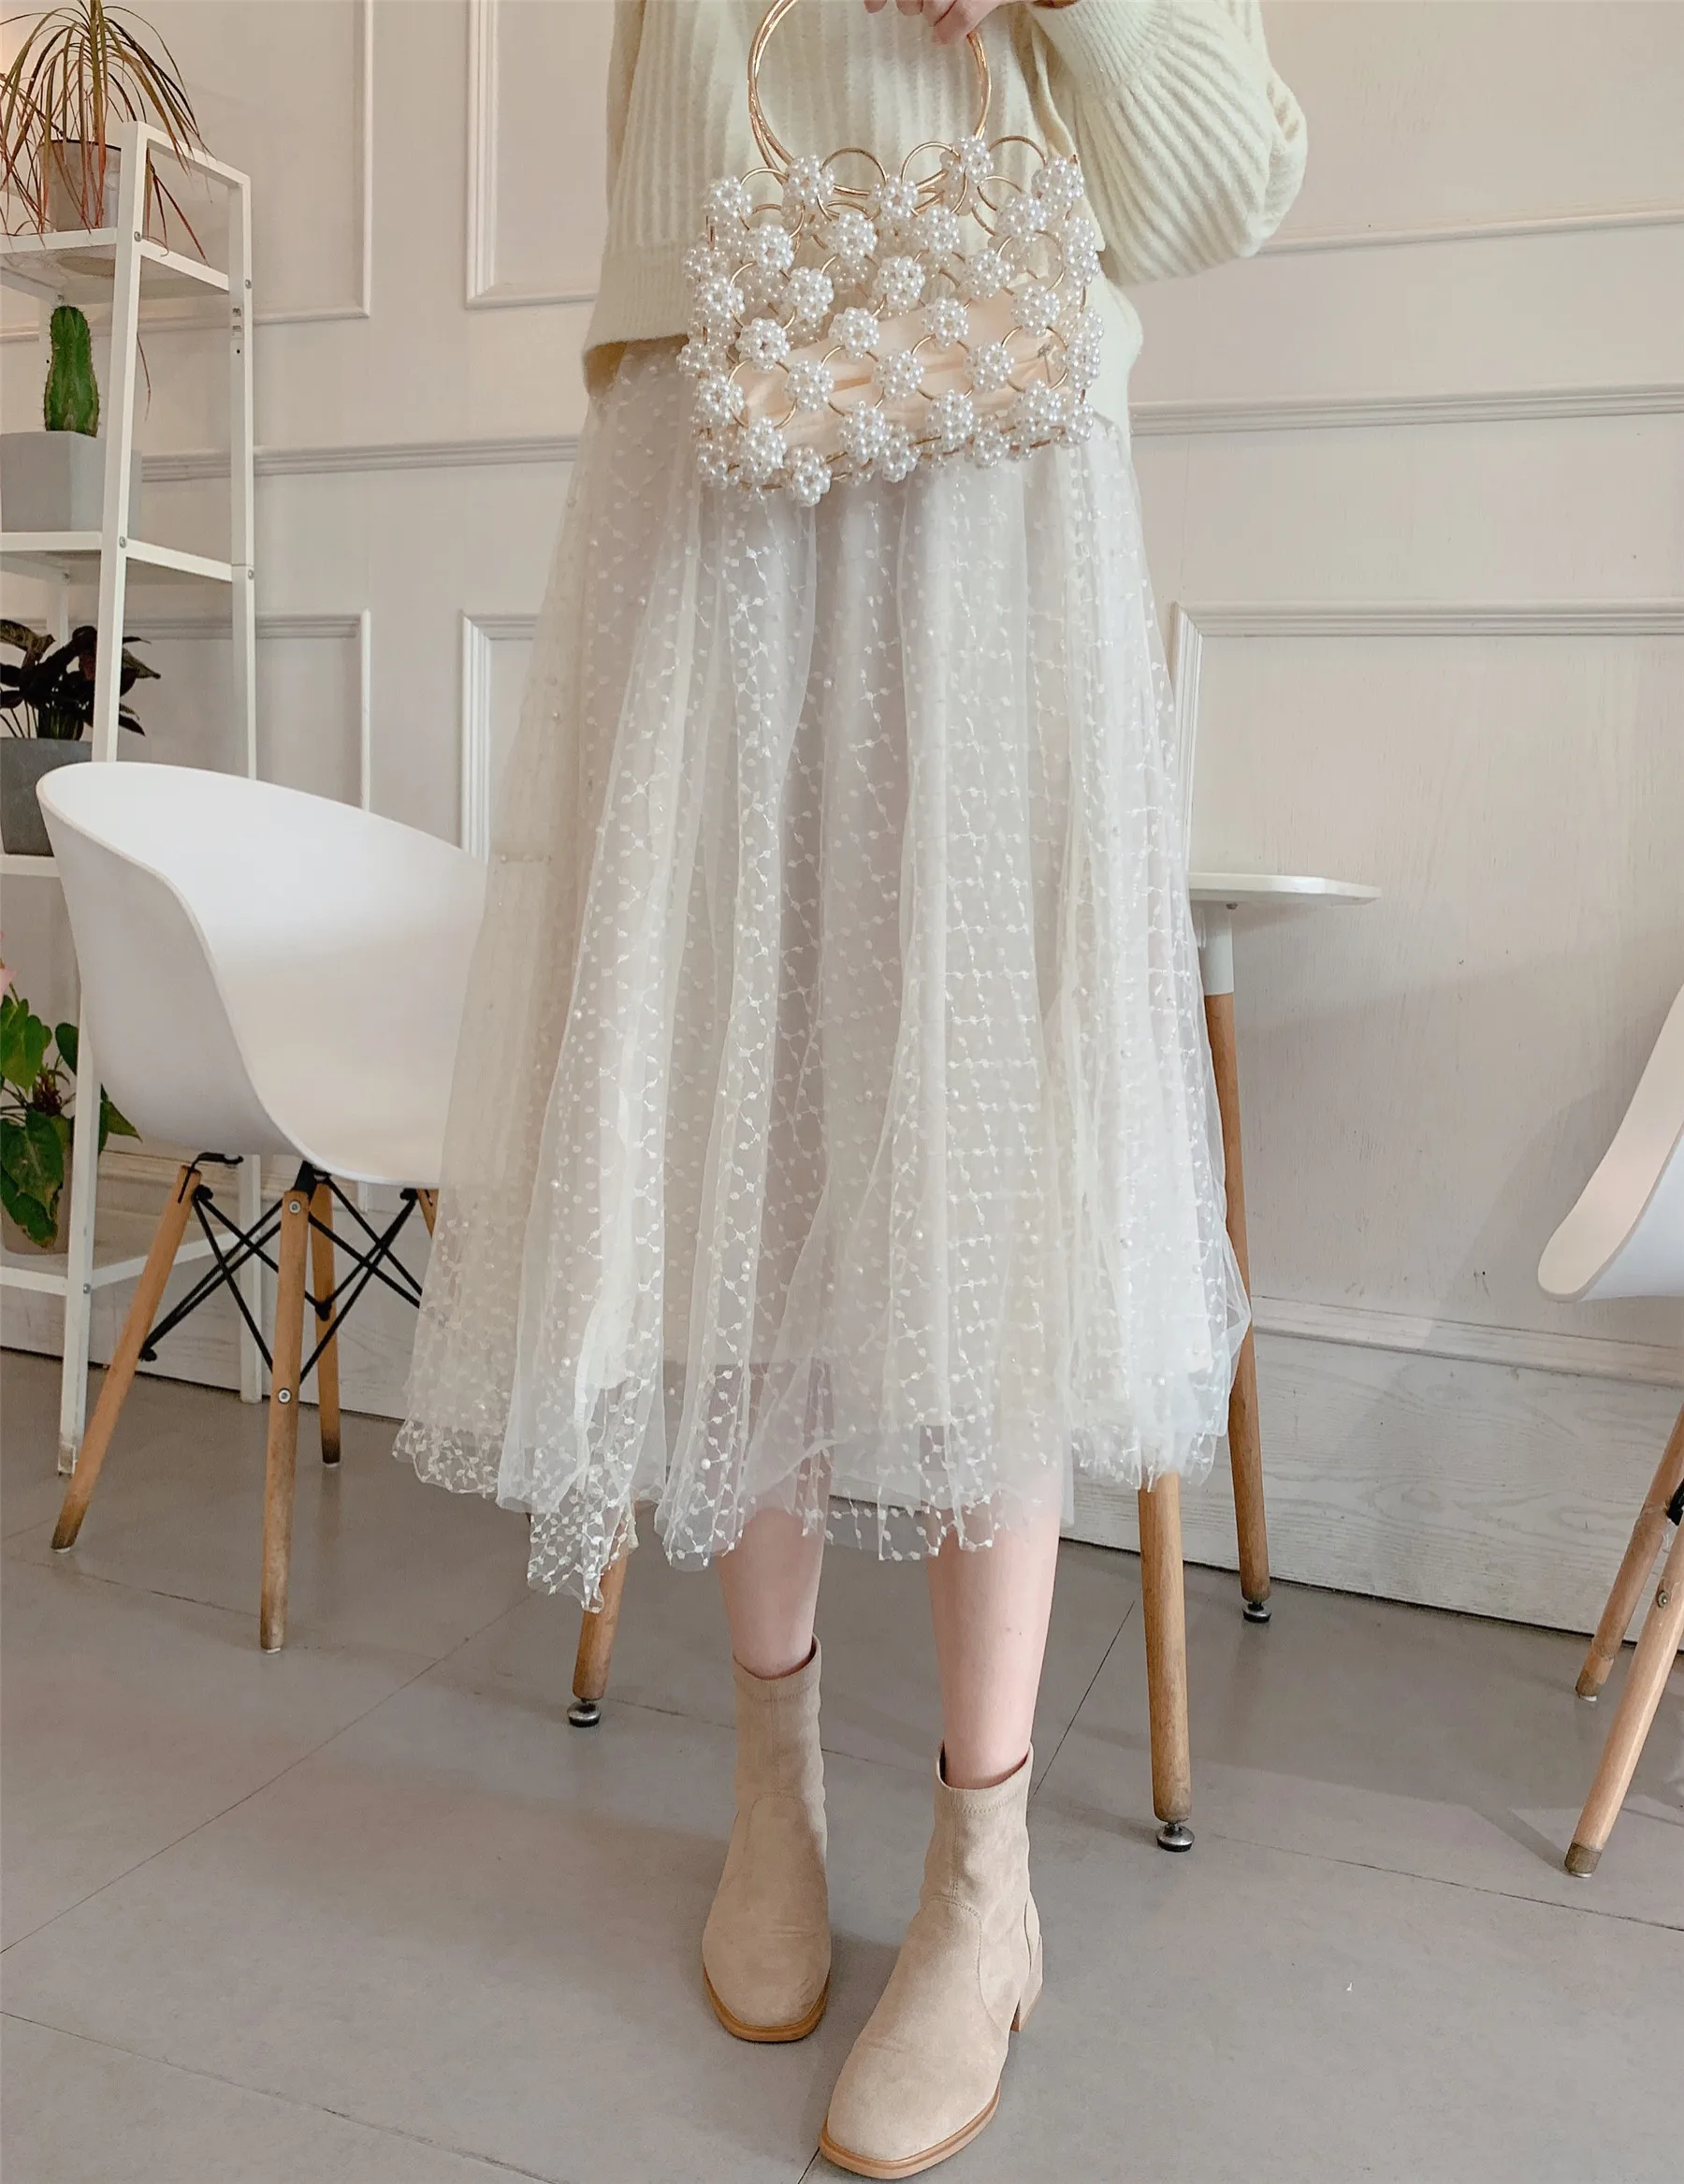 Pearl Skirt Slimming Pleated 2022 New Style Gentle Fairy Gauze Industrial Beads High-waisted Plus Velvet Women 's Mesh mesh pearl pendant fake collar elegant printed women false collar ruffle lace small scarf shiny headware dress accessories